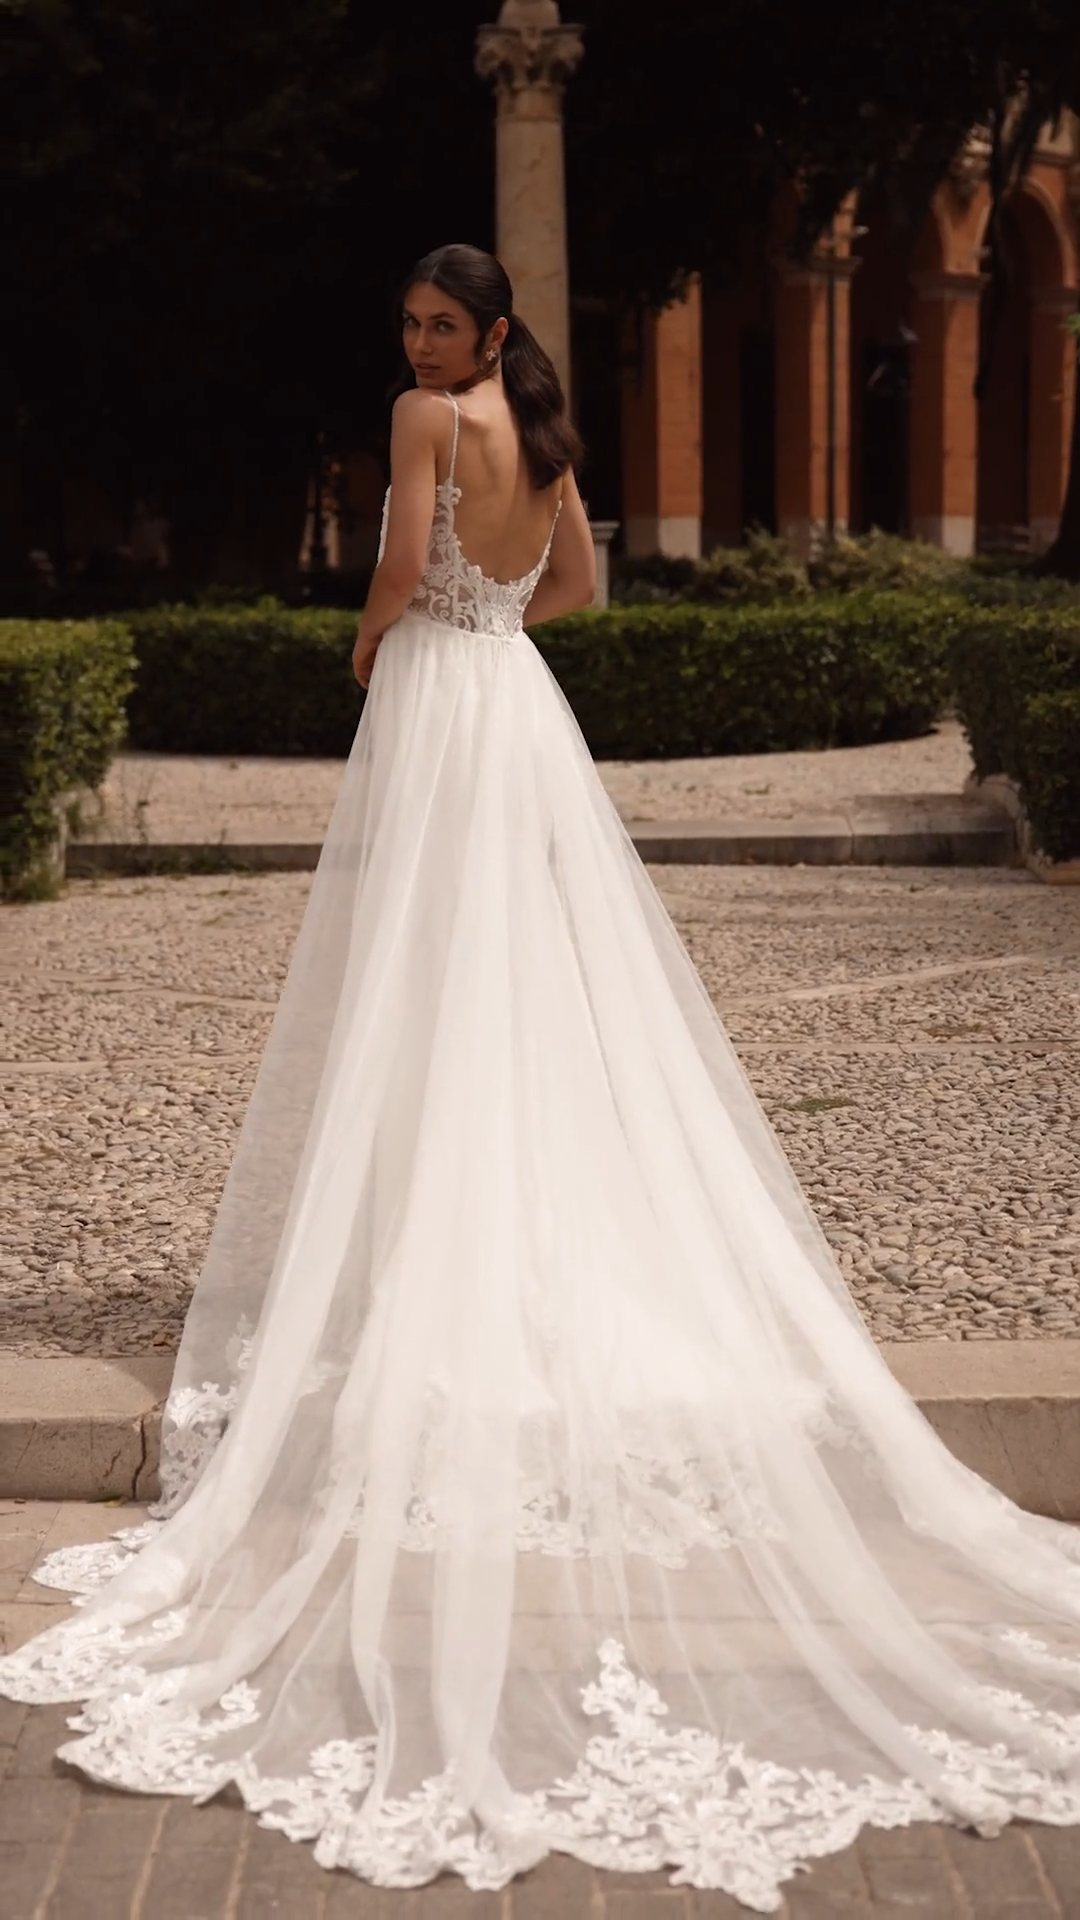 Bride wearing an ivory crepe convertible wedding dress with detachable tulle overskirt